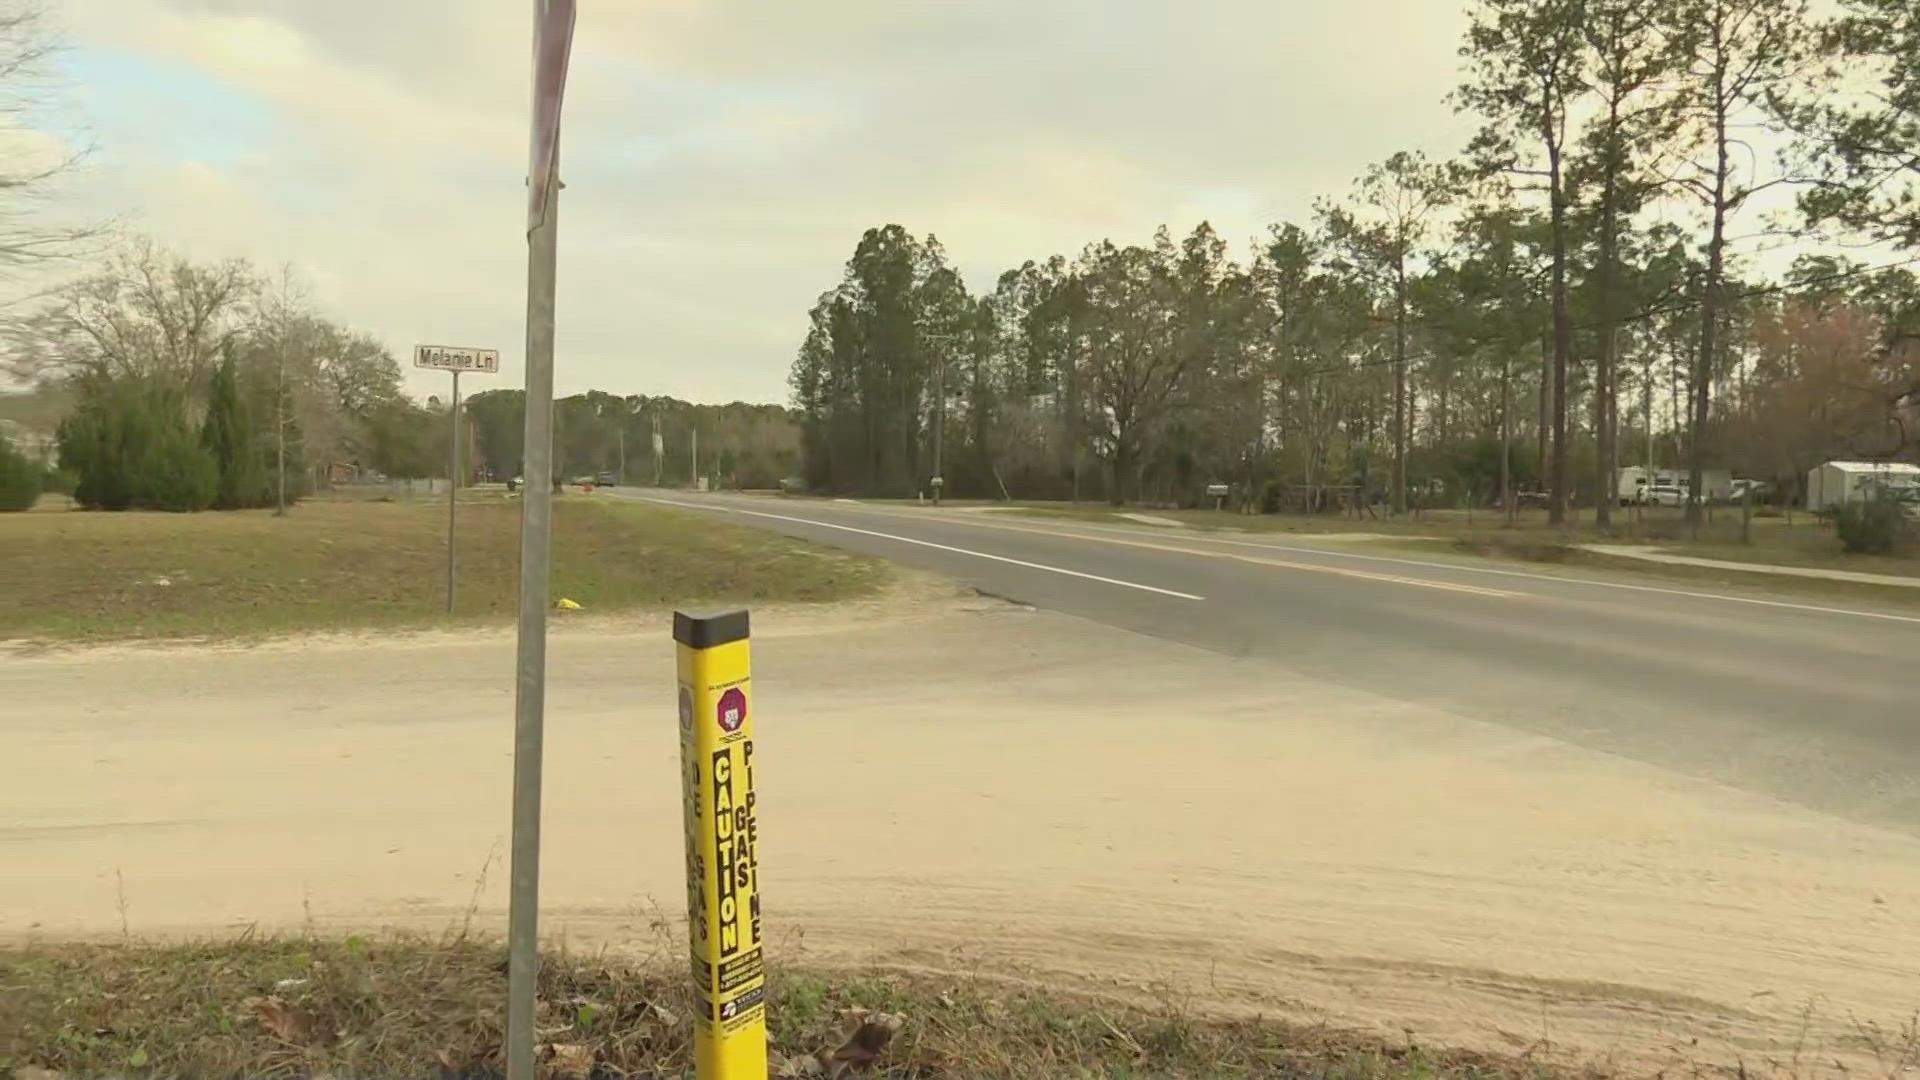 A child was hit by a car in Clay County while trying to cross the road. They were rushed to the hospital as a trauma alert, according to officials.